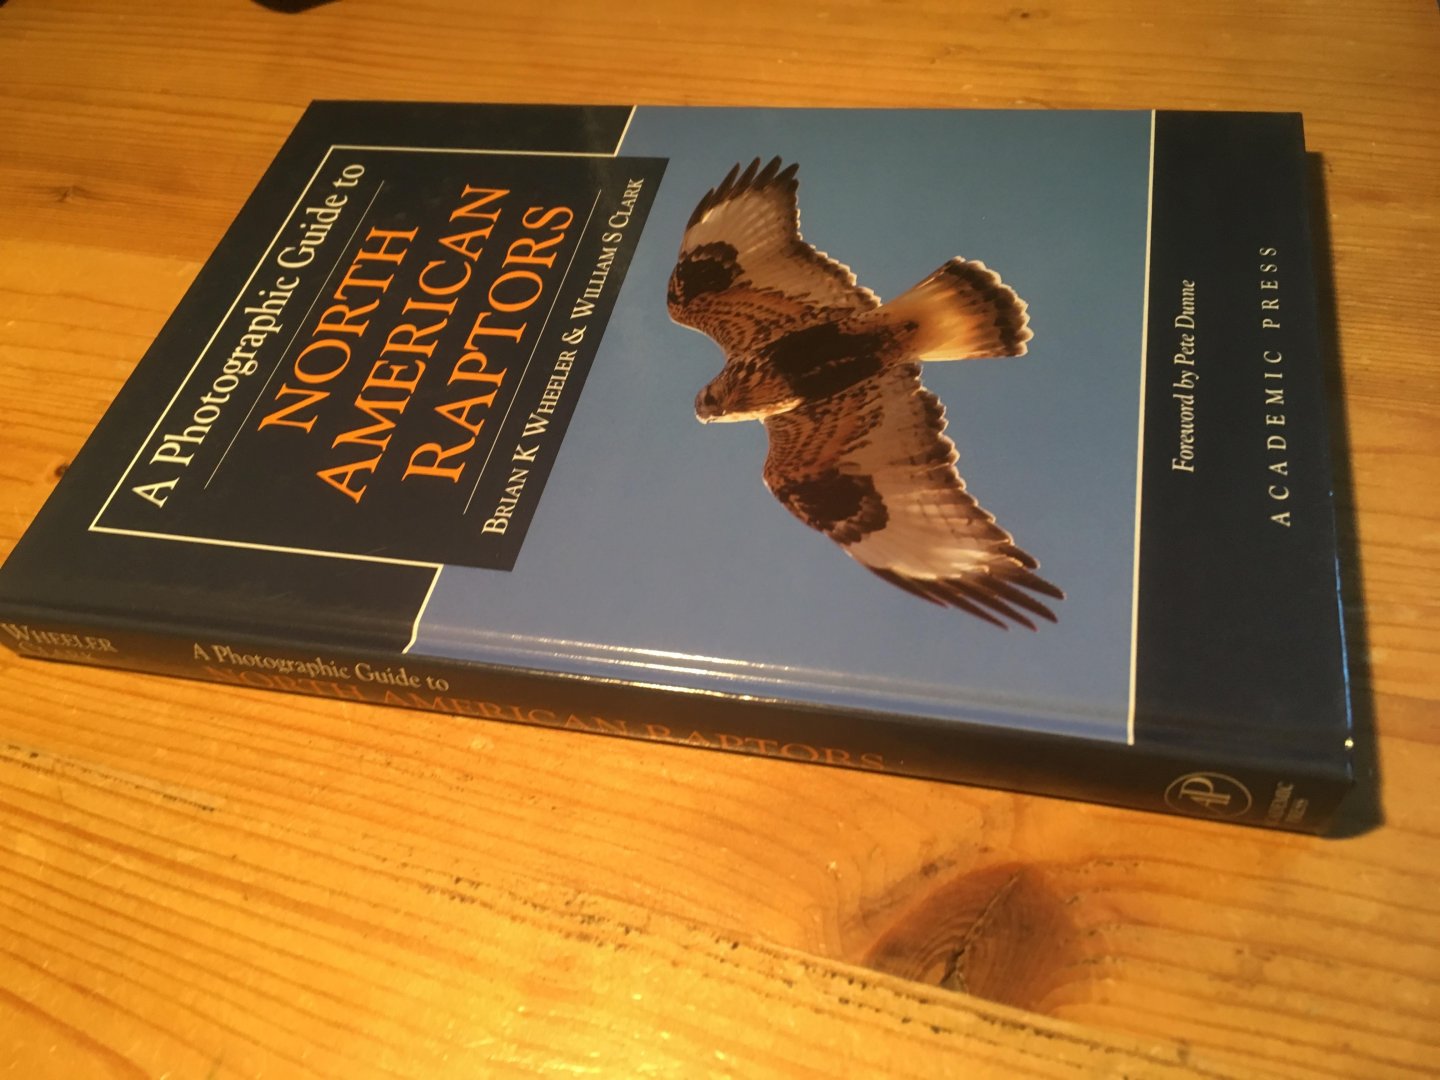 Wheeler, BK & WS Clark - A Photographic Guide to North American Raptors